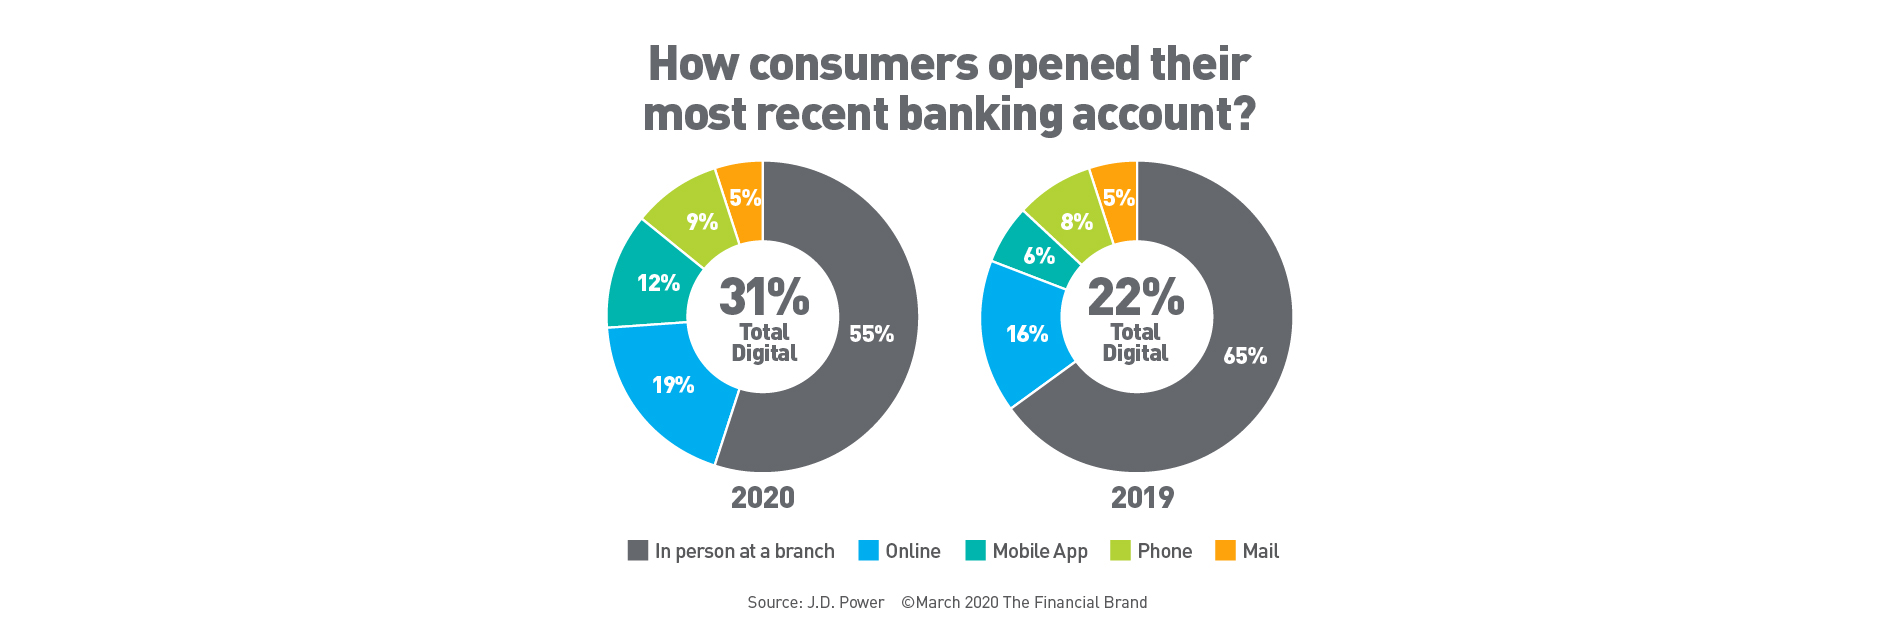 How Consumers Opened Their Most Recent Banking Account